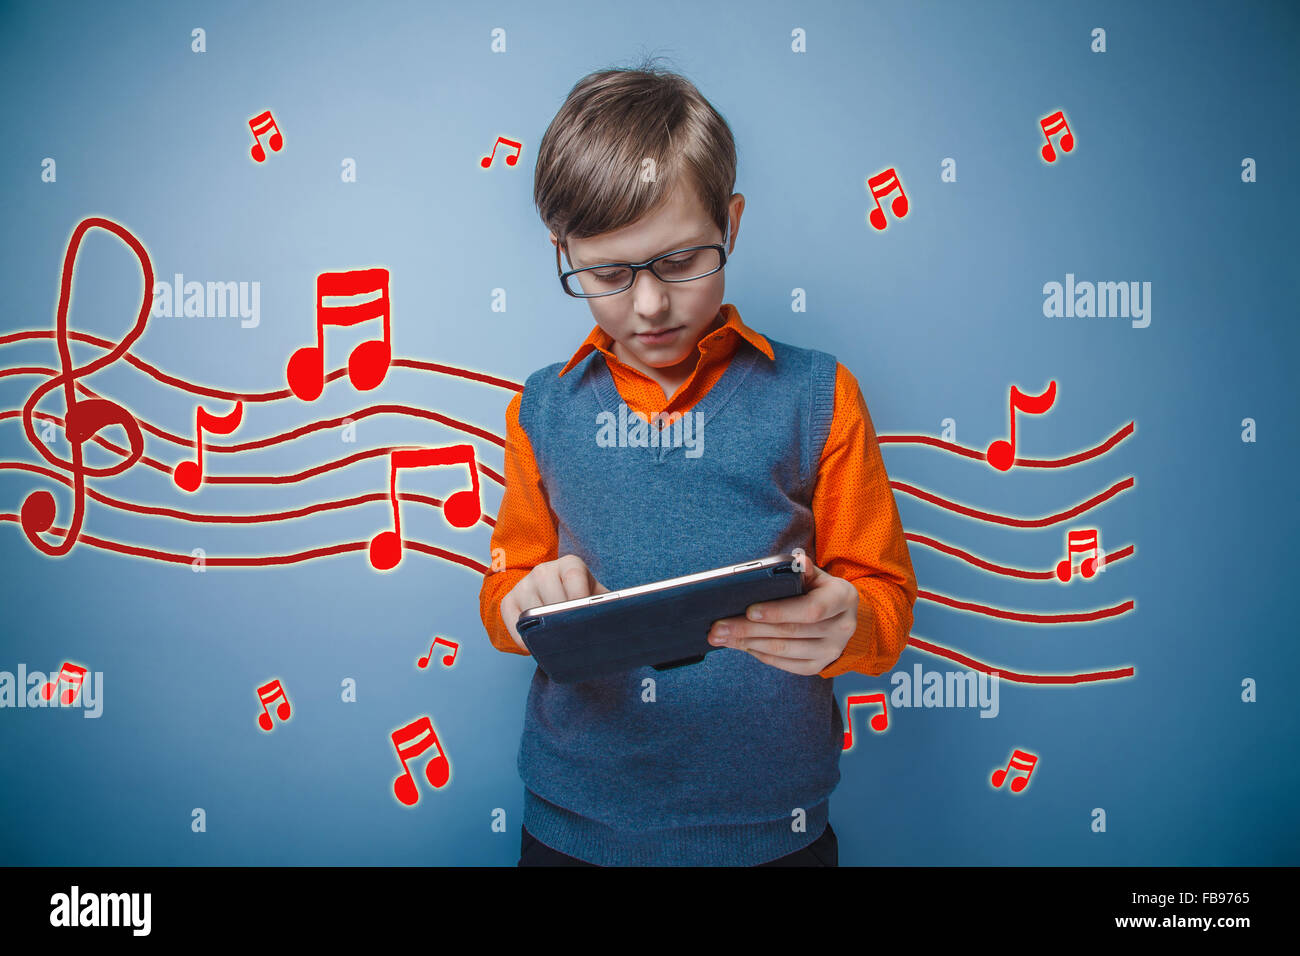 adolescent boy working on a tablet retro music notes sketch prev Stock Photo